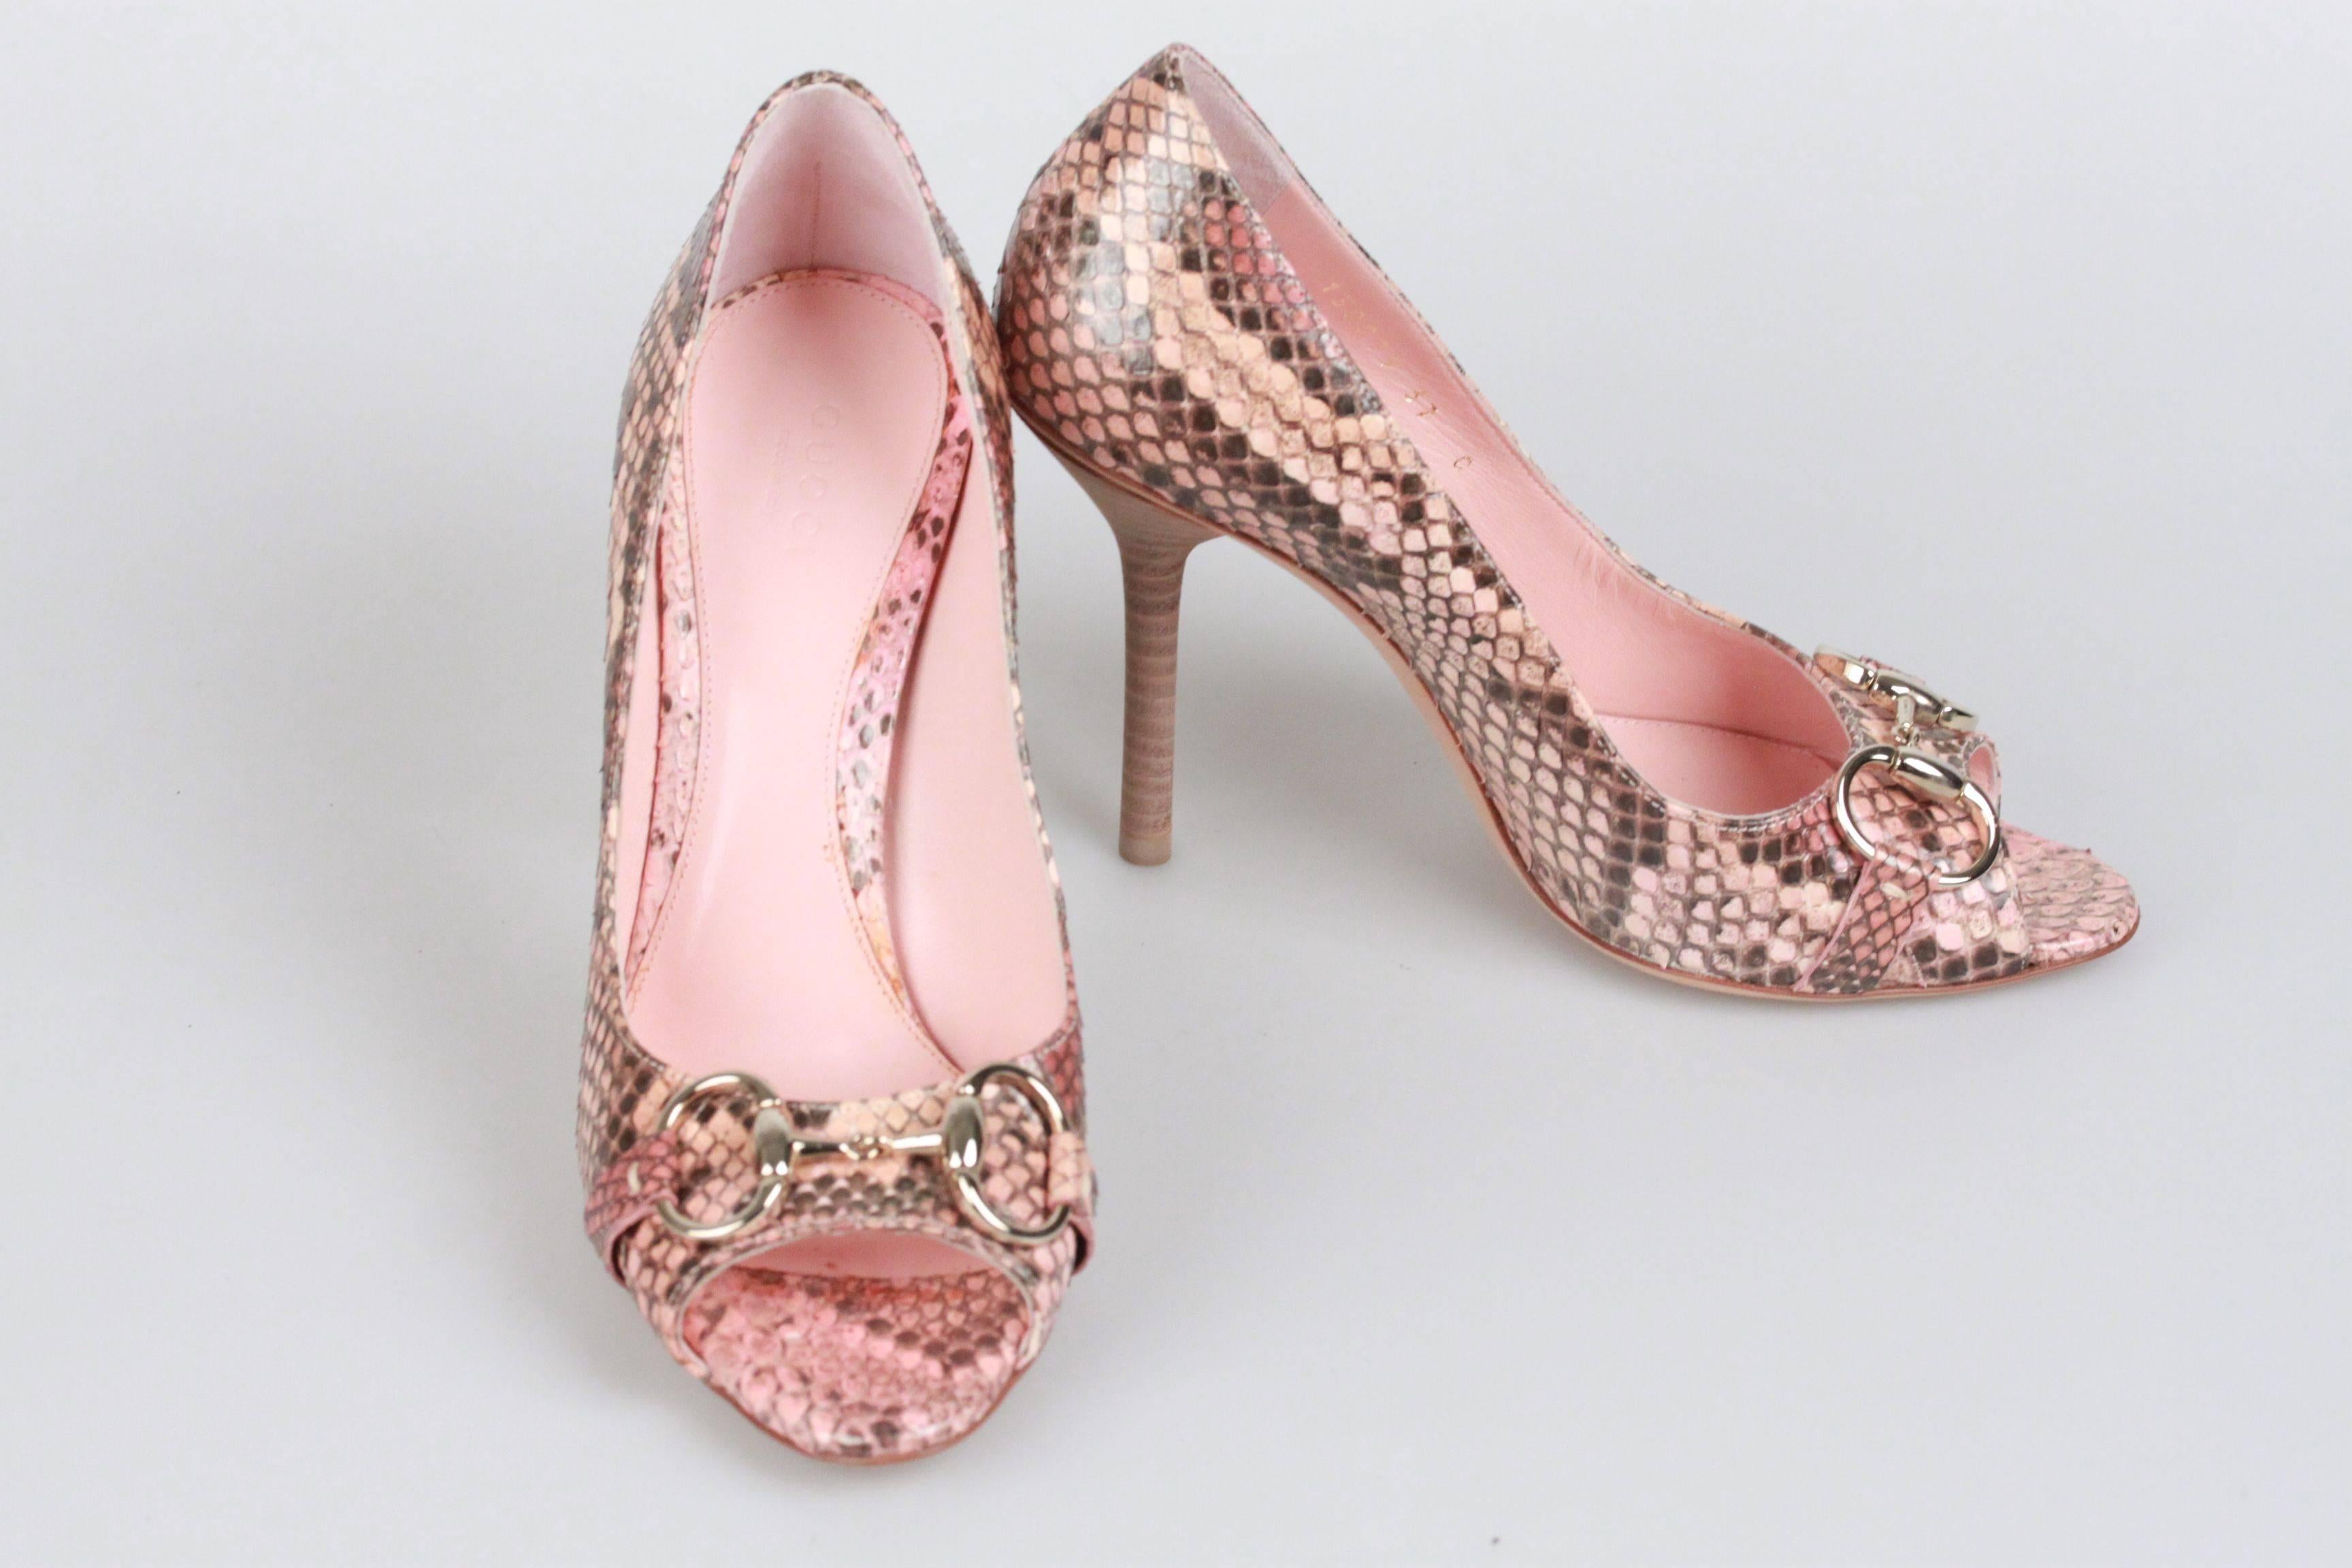 - GUCCI 'HOLLYWOOD' Peep Toe Shoes
- Pink Python
- Stiletto heels (4.25 inches - 10,7 cm)
- Open toe
- Light gold horsebit detailing on the toes
- Slip-on style
- Leather insole and outsole
- Size: 37C
- GUCCI dustbags included
 